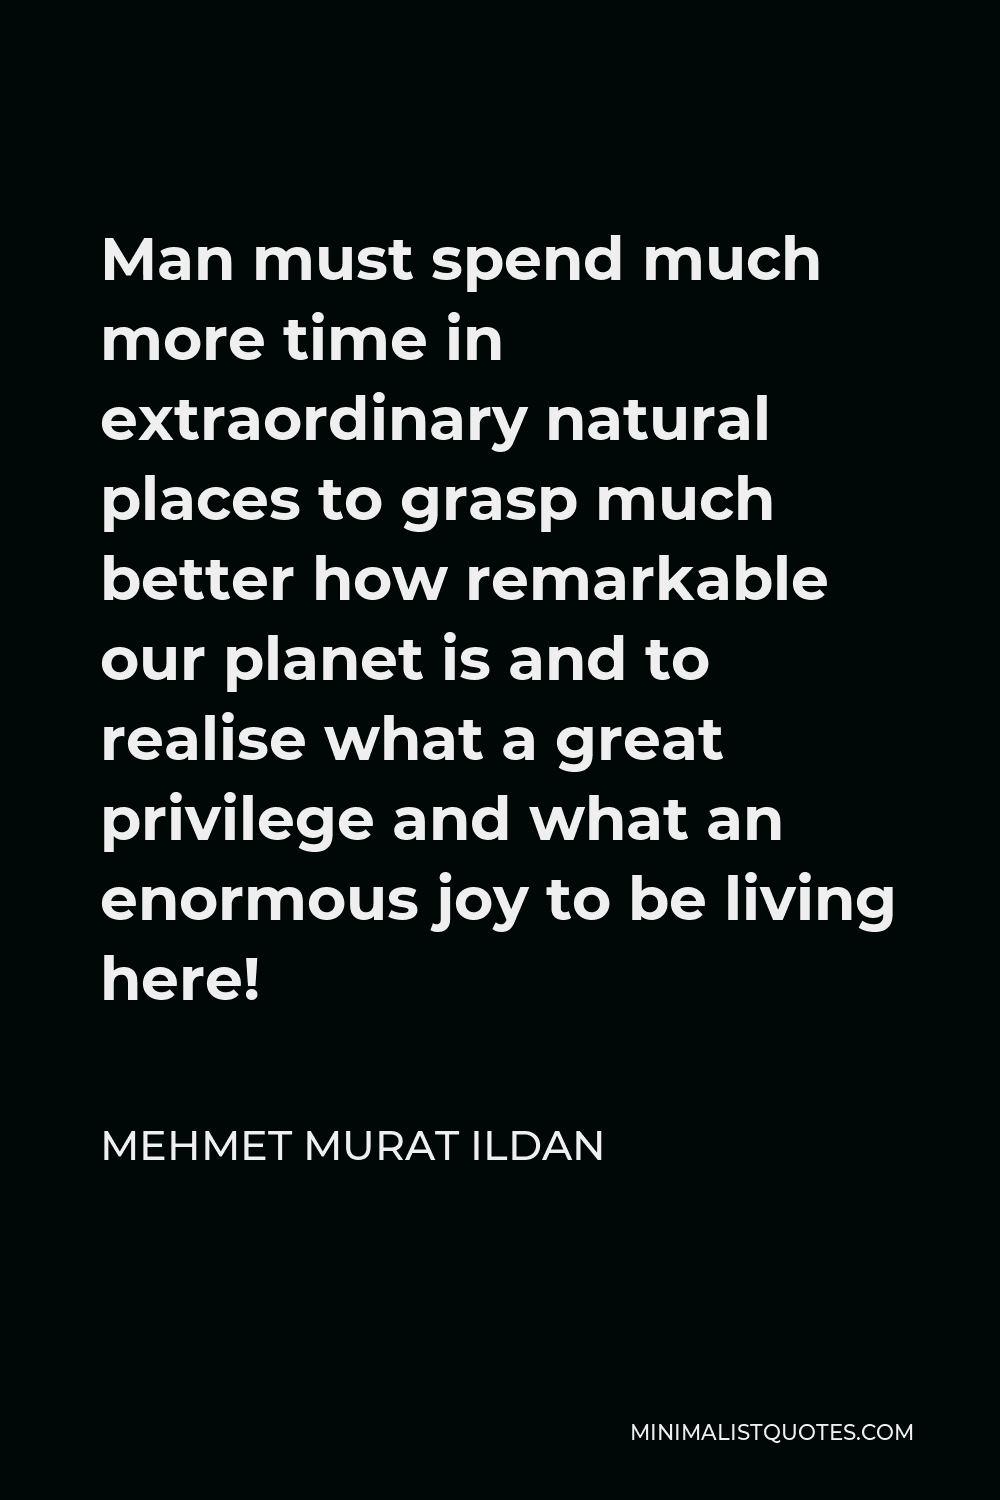 Mehmet Murat Ildan Quote - Man must spend much more time in extraordinary natural places to grasp much better how remarkable our planet is and to realise what a great privilege and what an enormous joy to be living here!